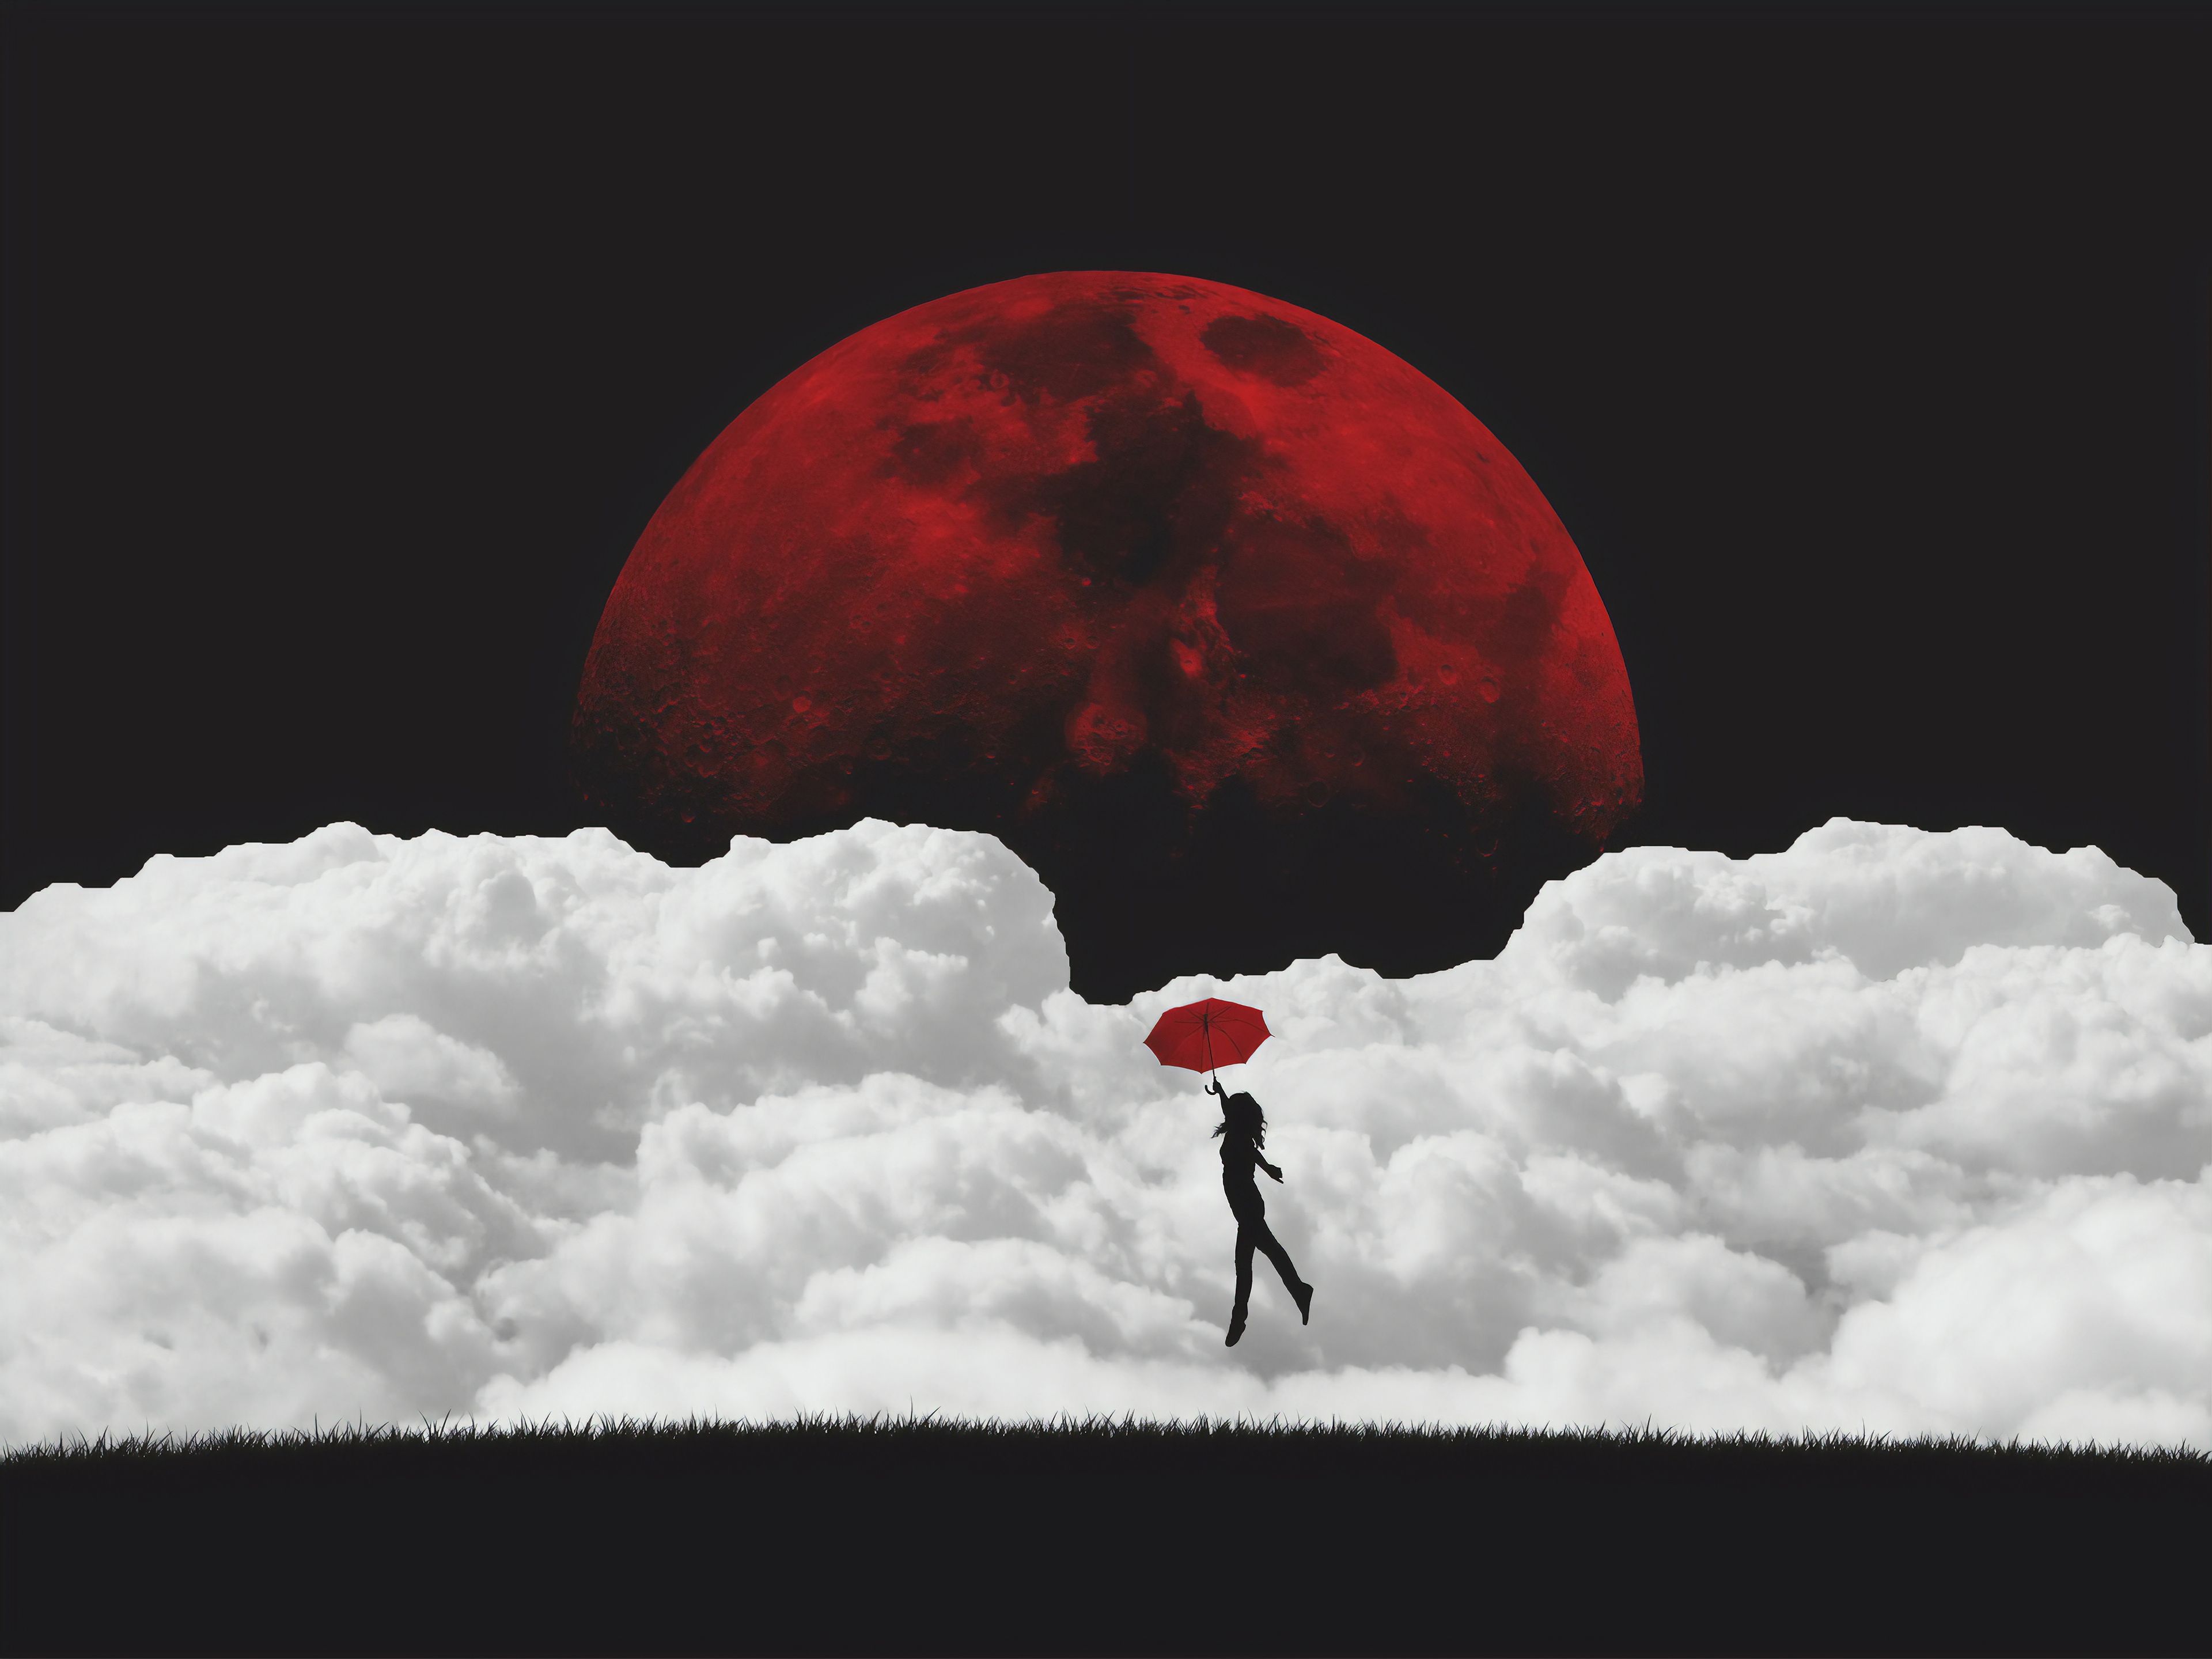 Wallpaper Red Moon, Dream, Flying, Clouds, 4K, Fantasy / Editor's